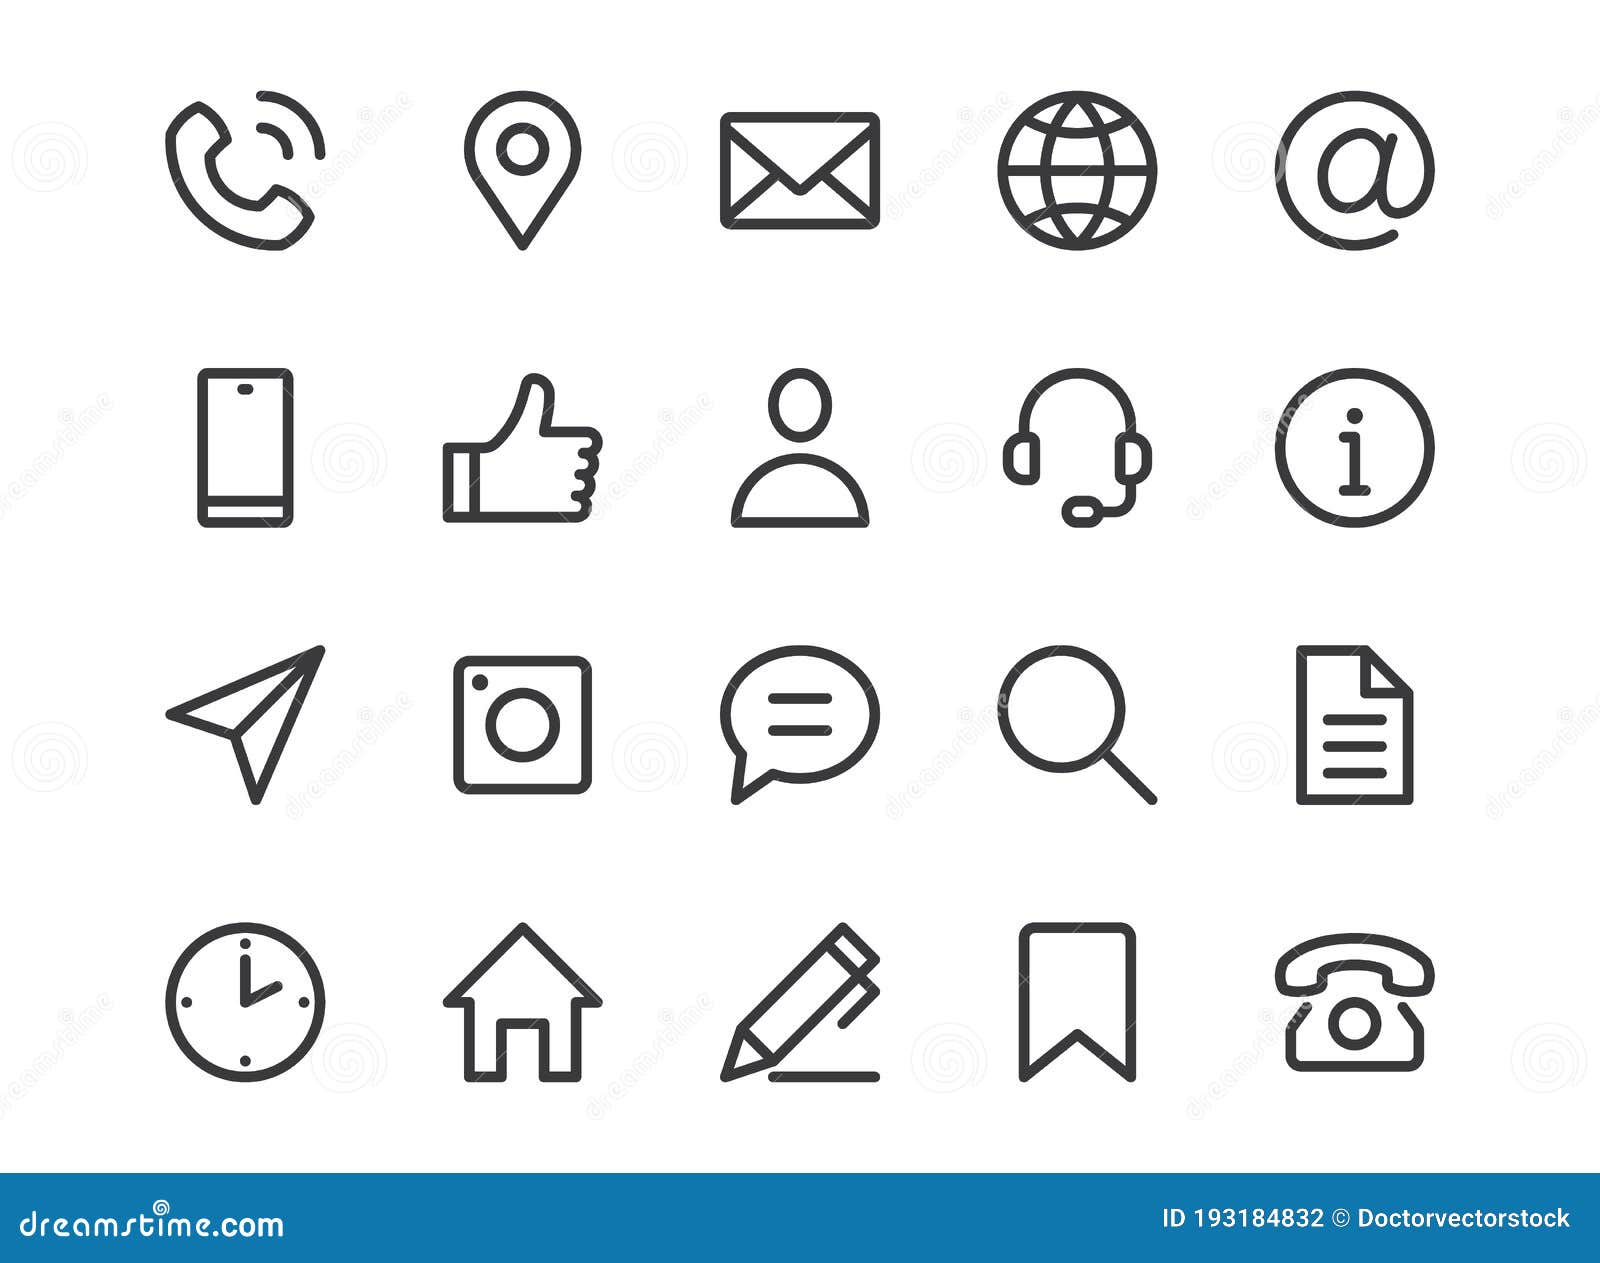 contact us line icon. minimal   with simple outline icons as phone, email, web site, address, location